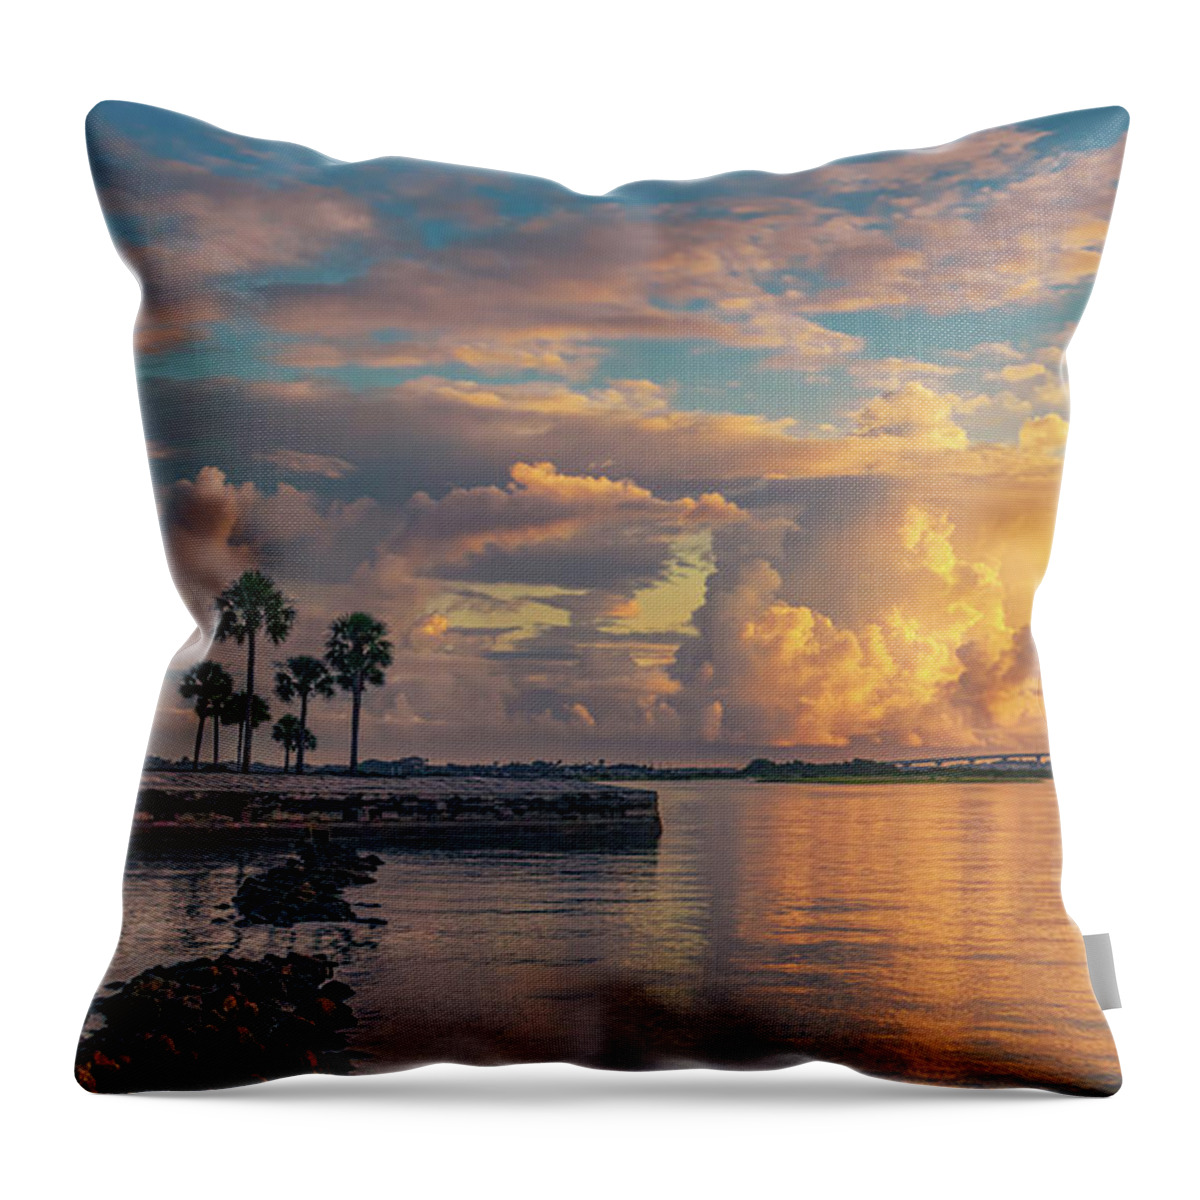 Sunrise Throw Pillow featuring the photograph Morning Glory by Karen Sirnick